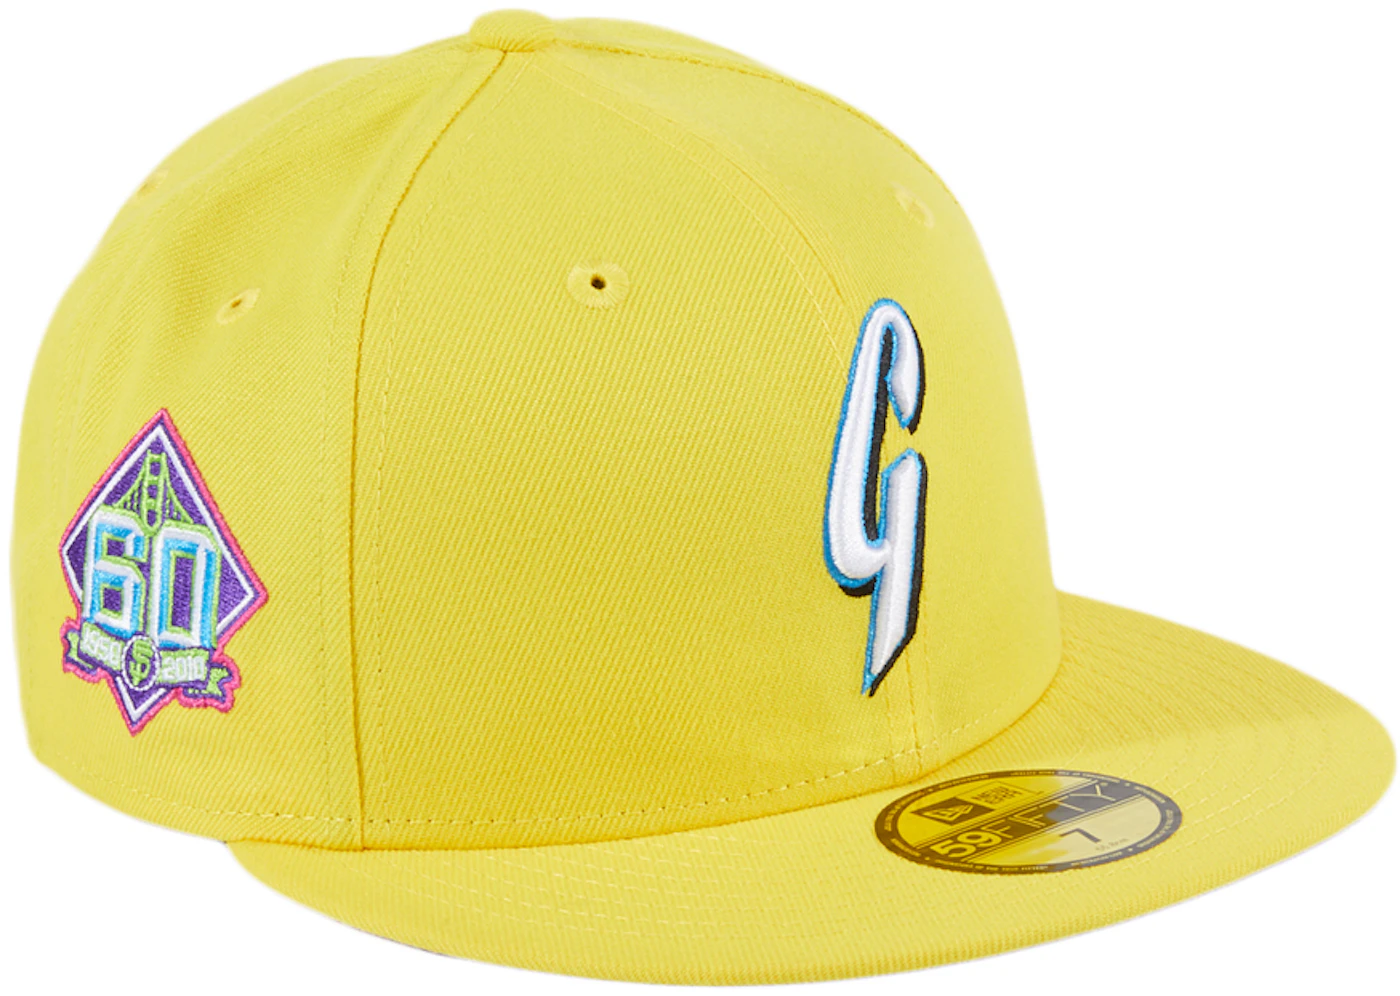 Los Angeles Dodgers New Era Neon Fill 59FIFTY Fitted Hat - Black